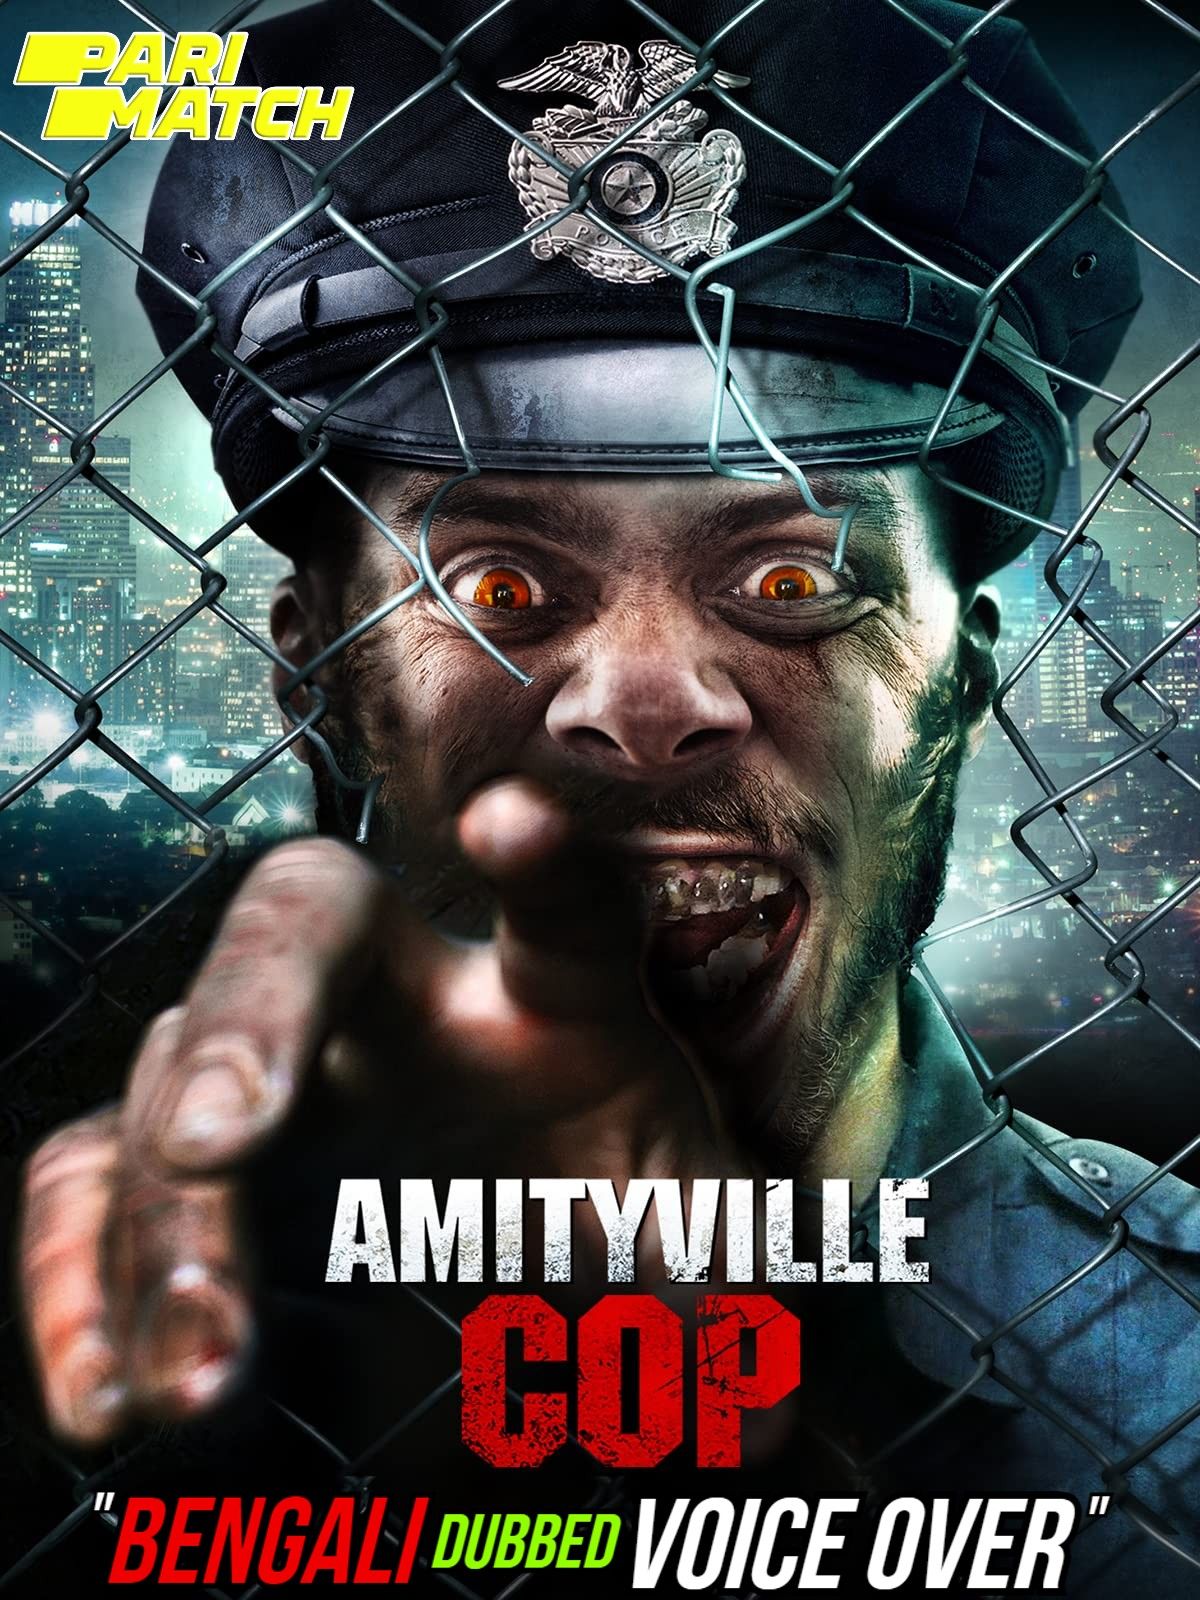 Amityville Cop (2021) Bengali (Voice Over) Dubbed WEBRip download full movie